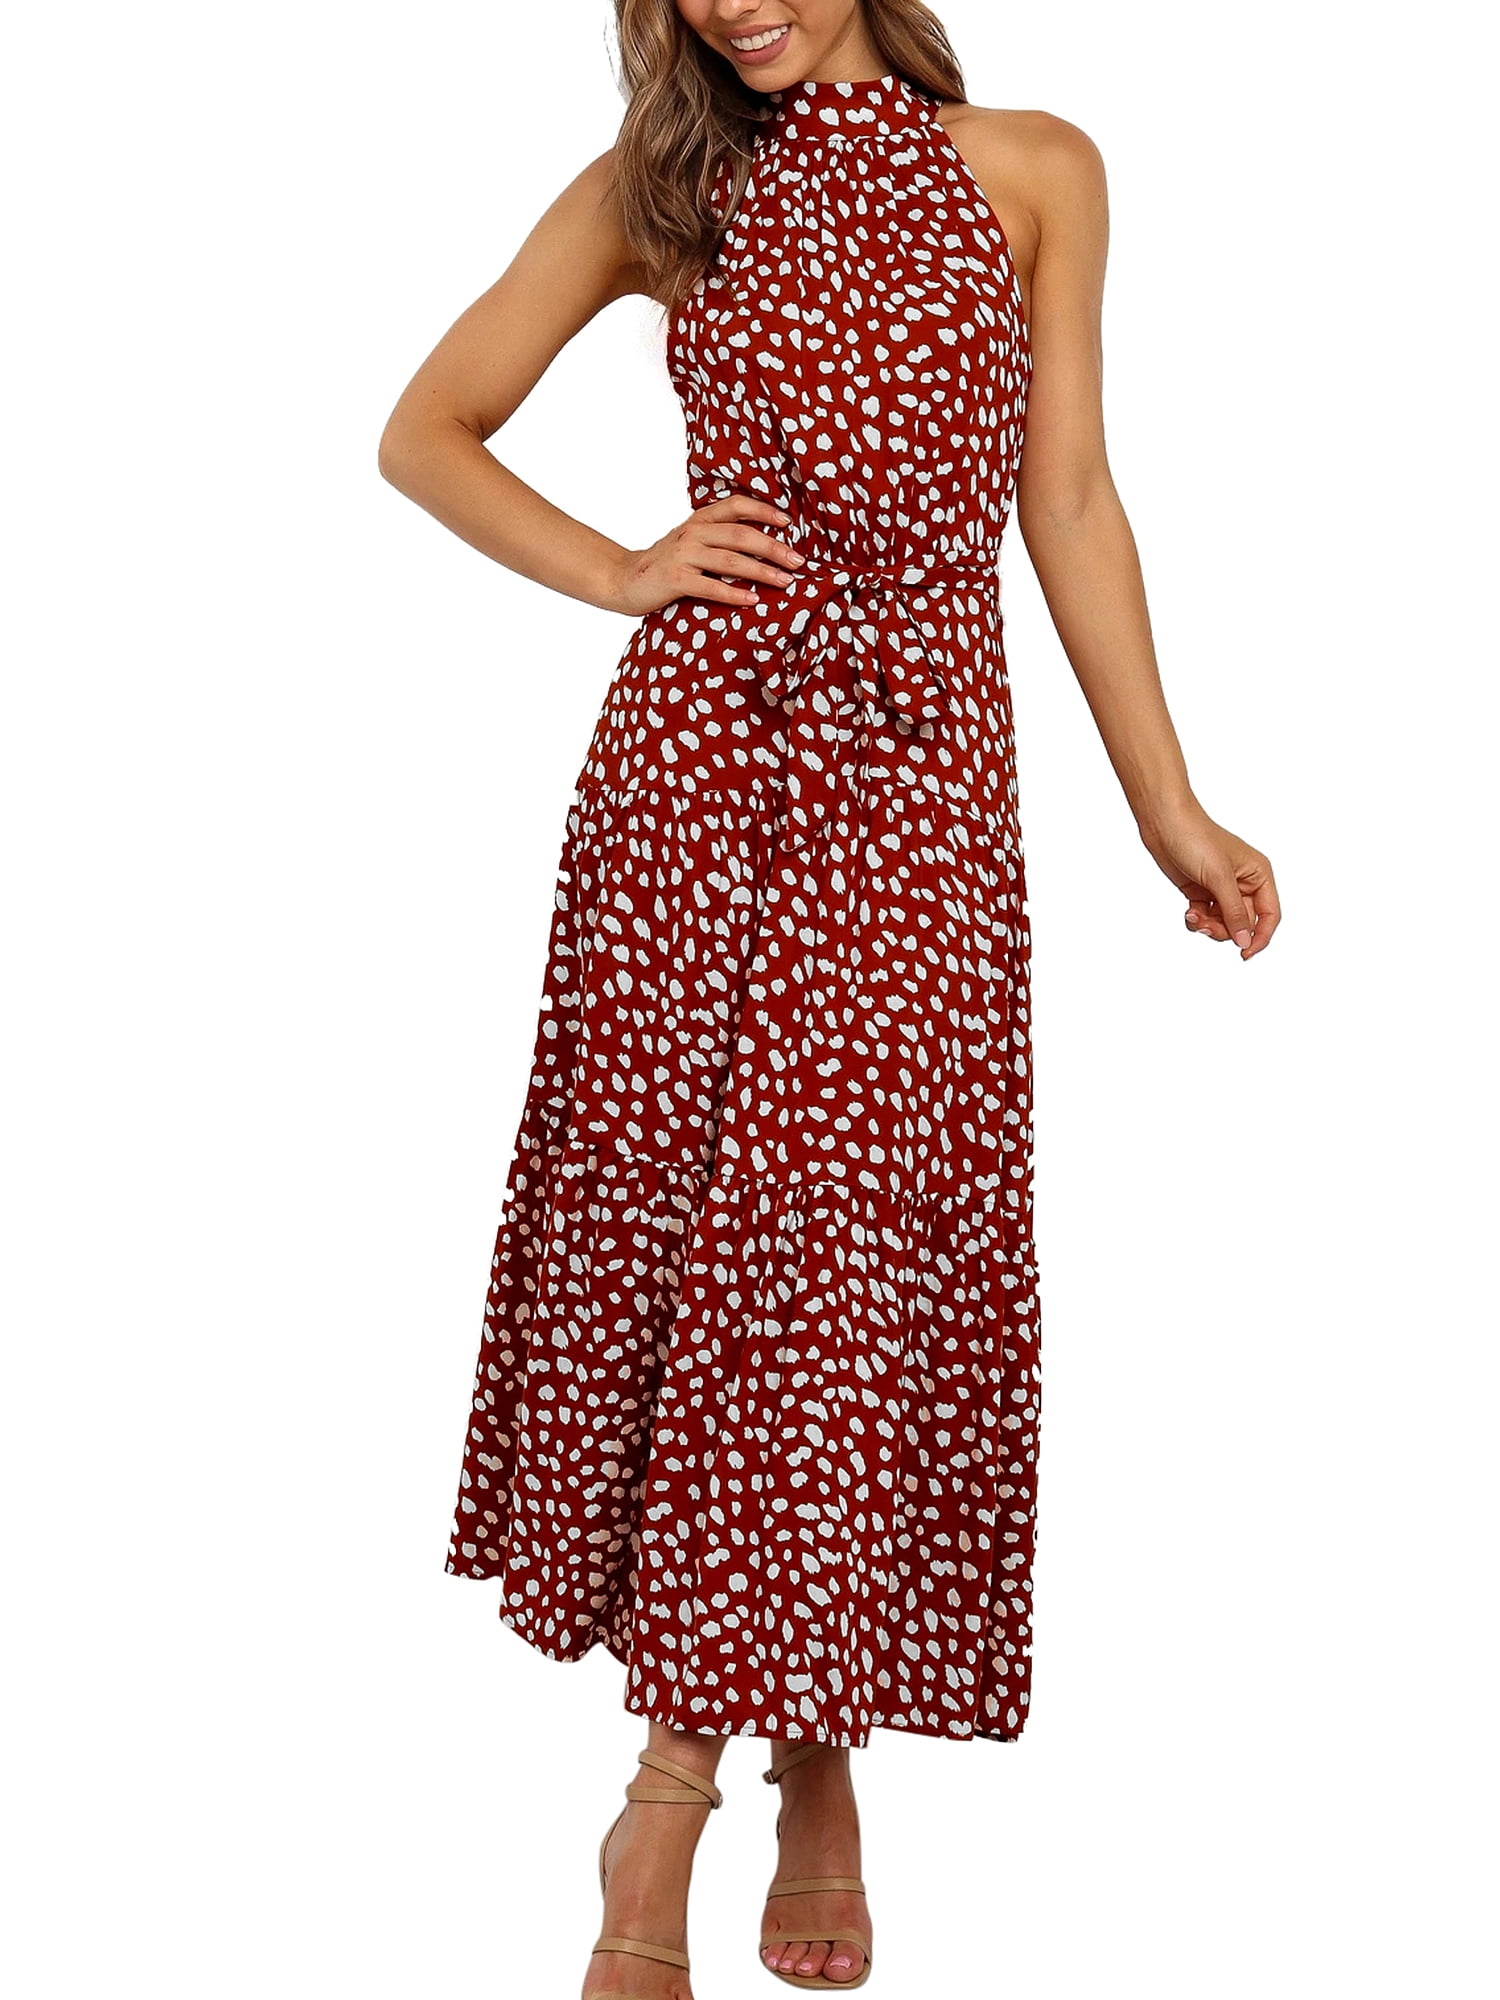 Comeon Women Floral Print Halter Neck Dress Backless Boho Beach Party Maxi Dresses with Belt